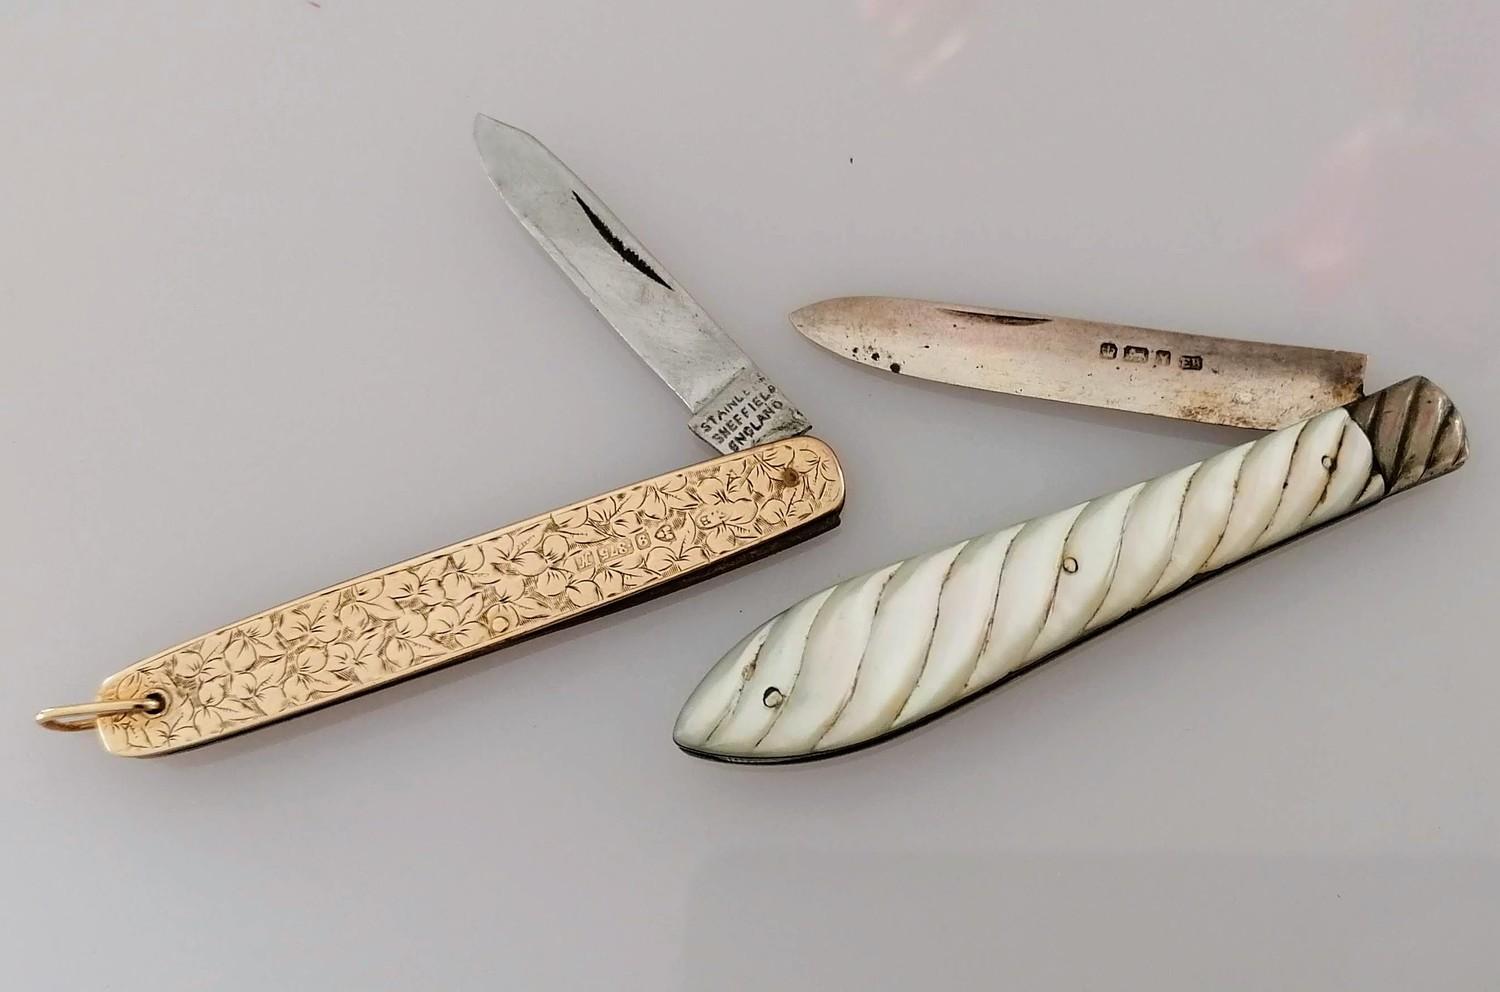 An Edwardian twin-bladed penknife with etched floral decoration by E Baker & Son, Chester, 1908, 7